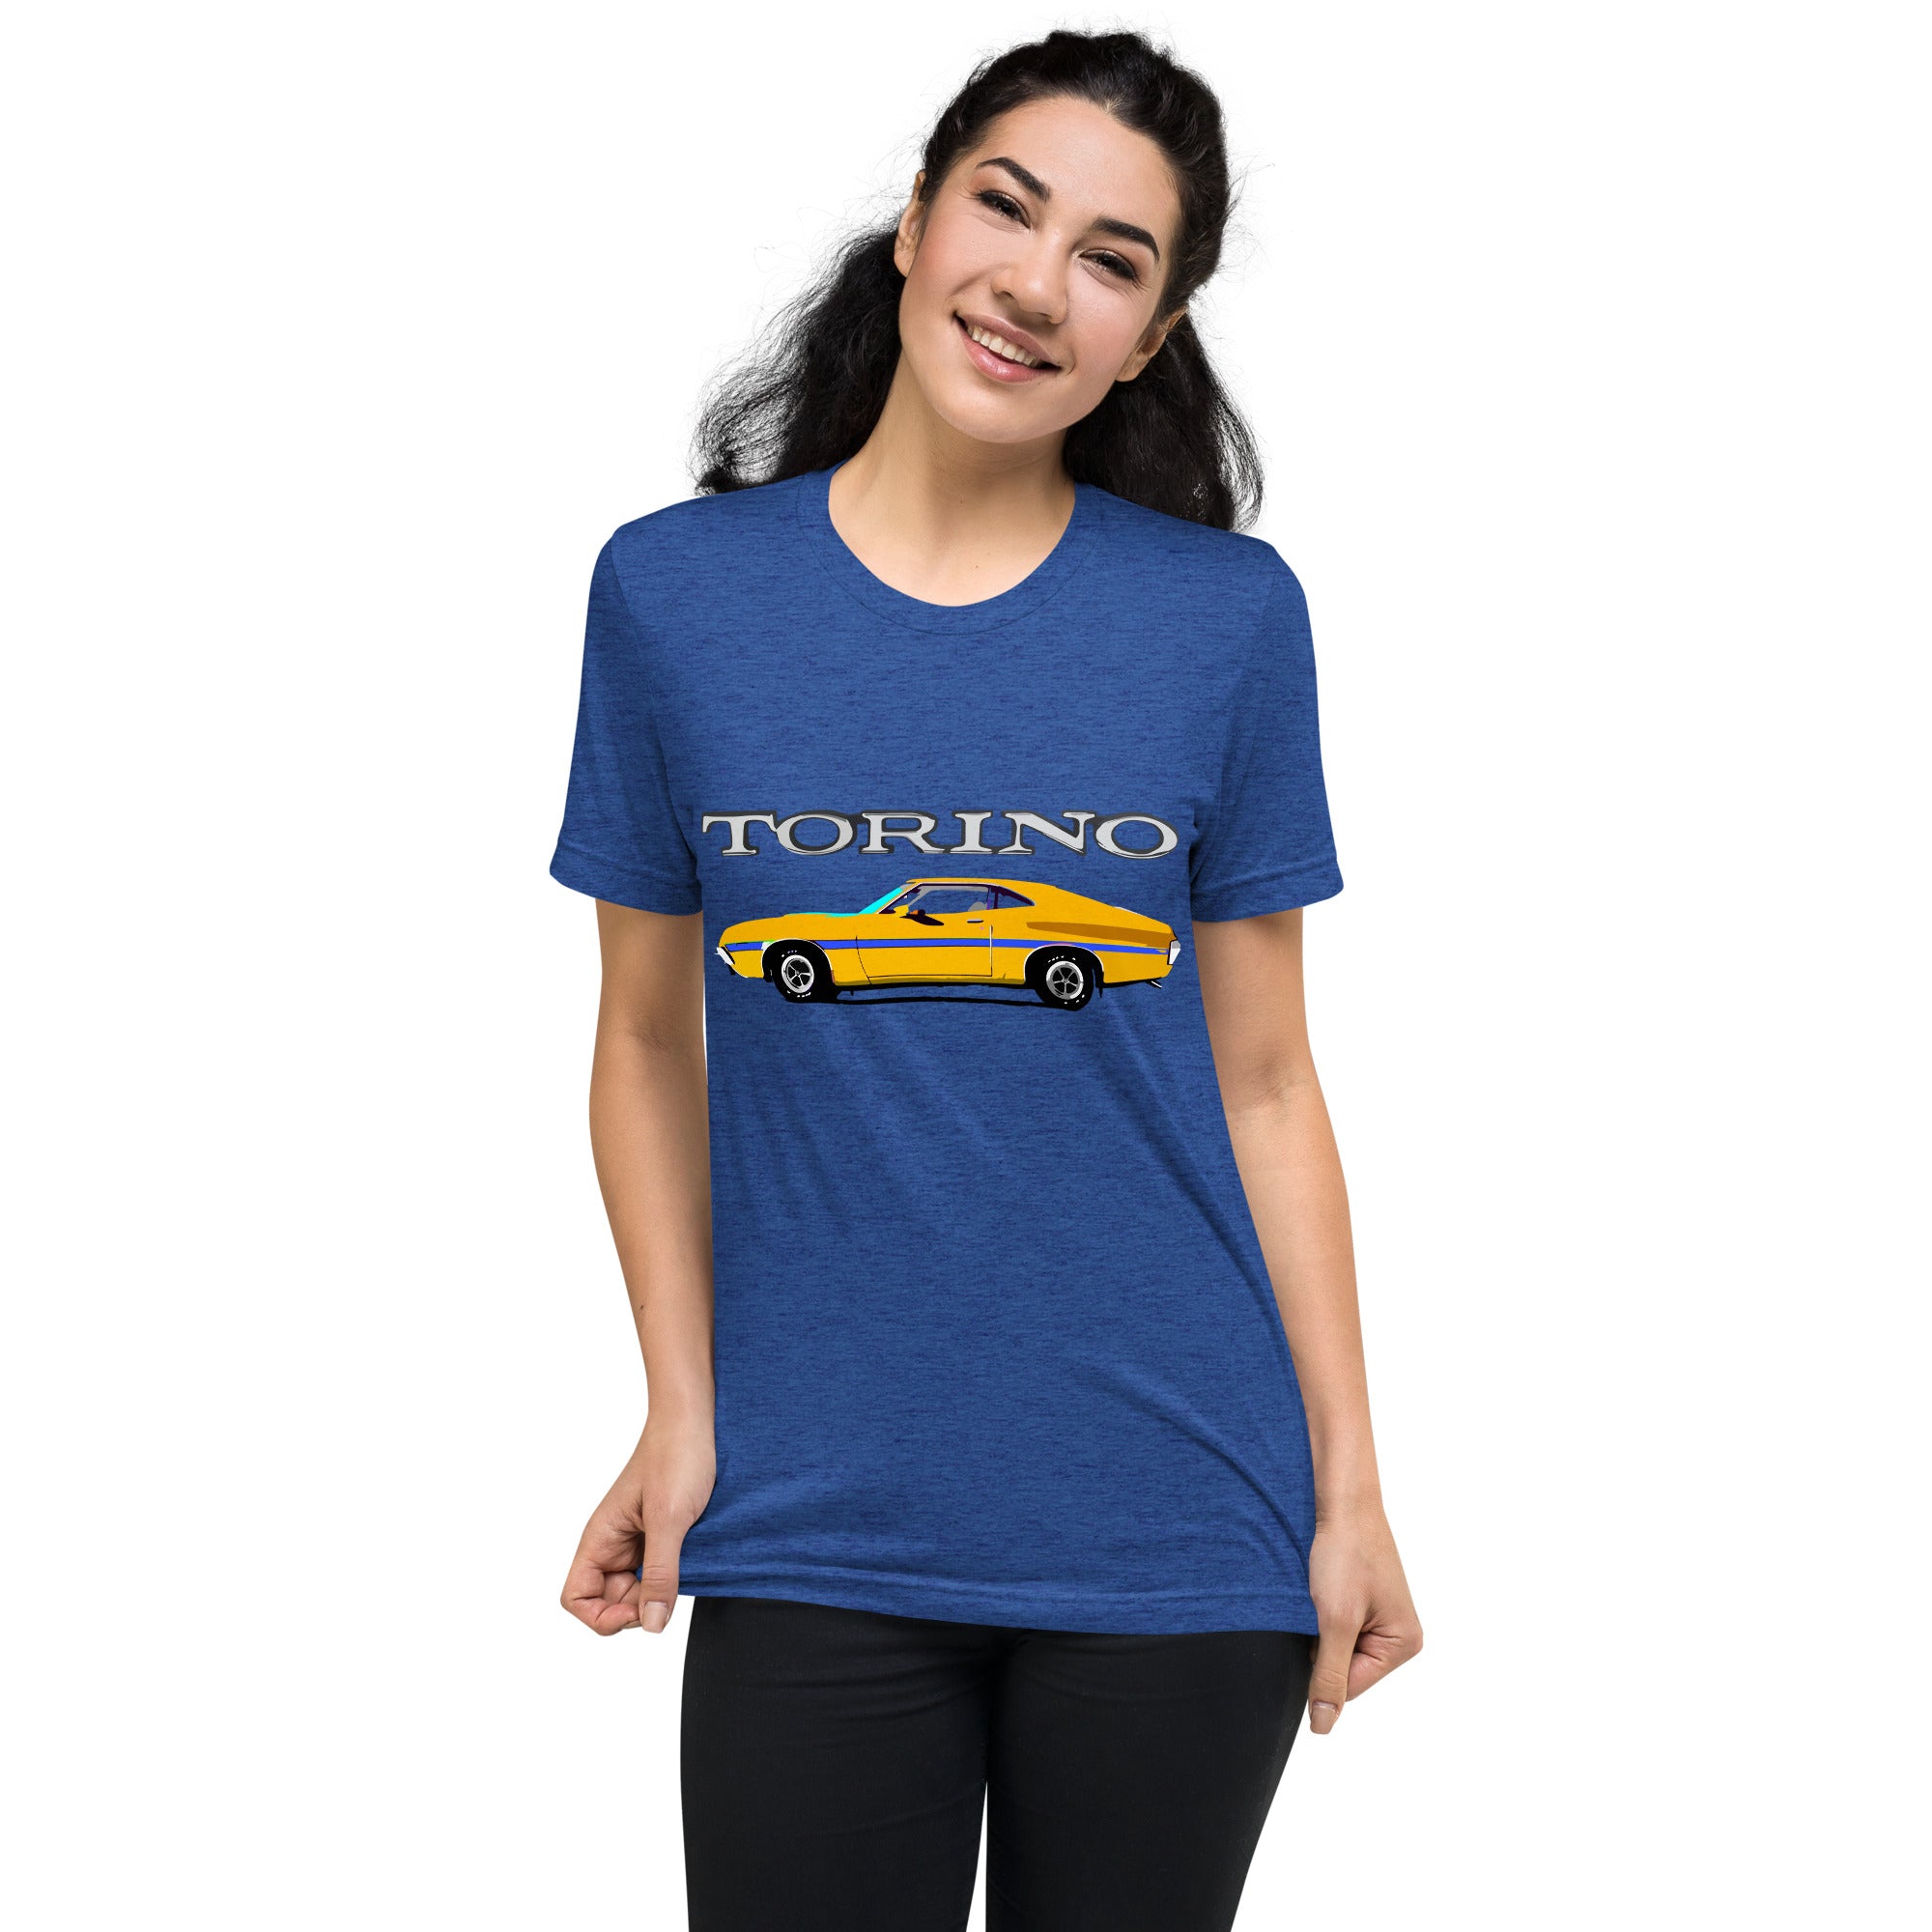 1972 Yellow Gold Ford Gran Torino Sport Muscle Car Owner Gift tri-blend t-shirt